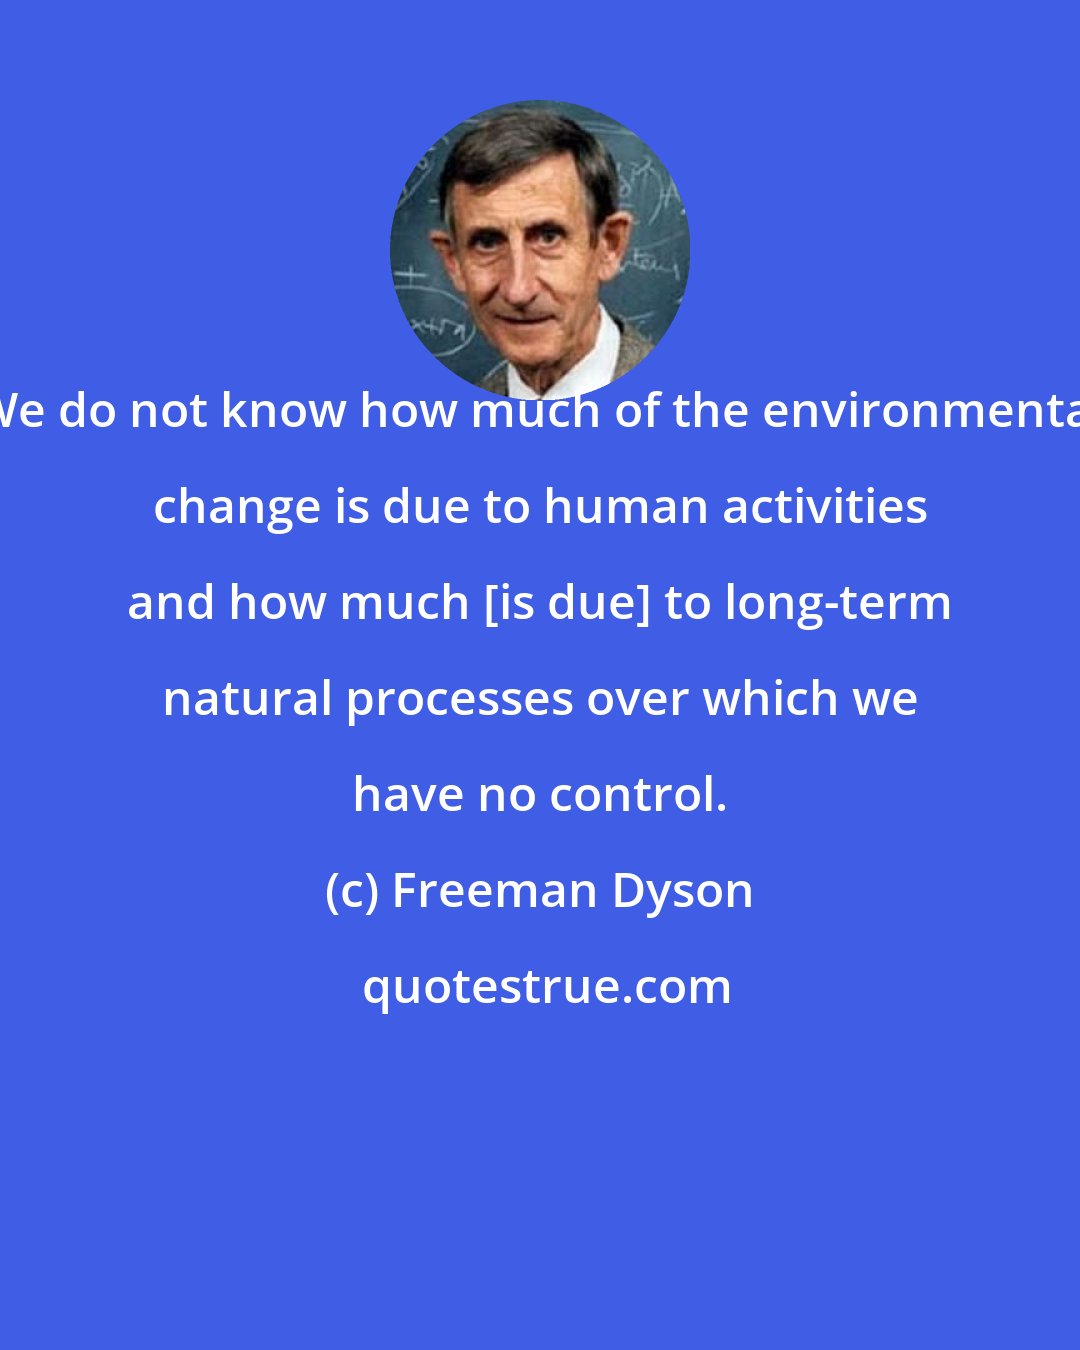 Freeman Dyson: We do not know how much of the environmental change is due to human activities and how much [is due] to long-term natural processes over which we have no control.